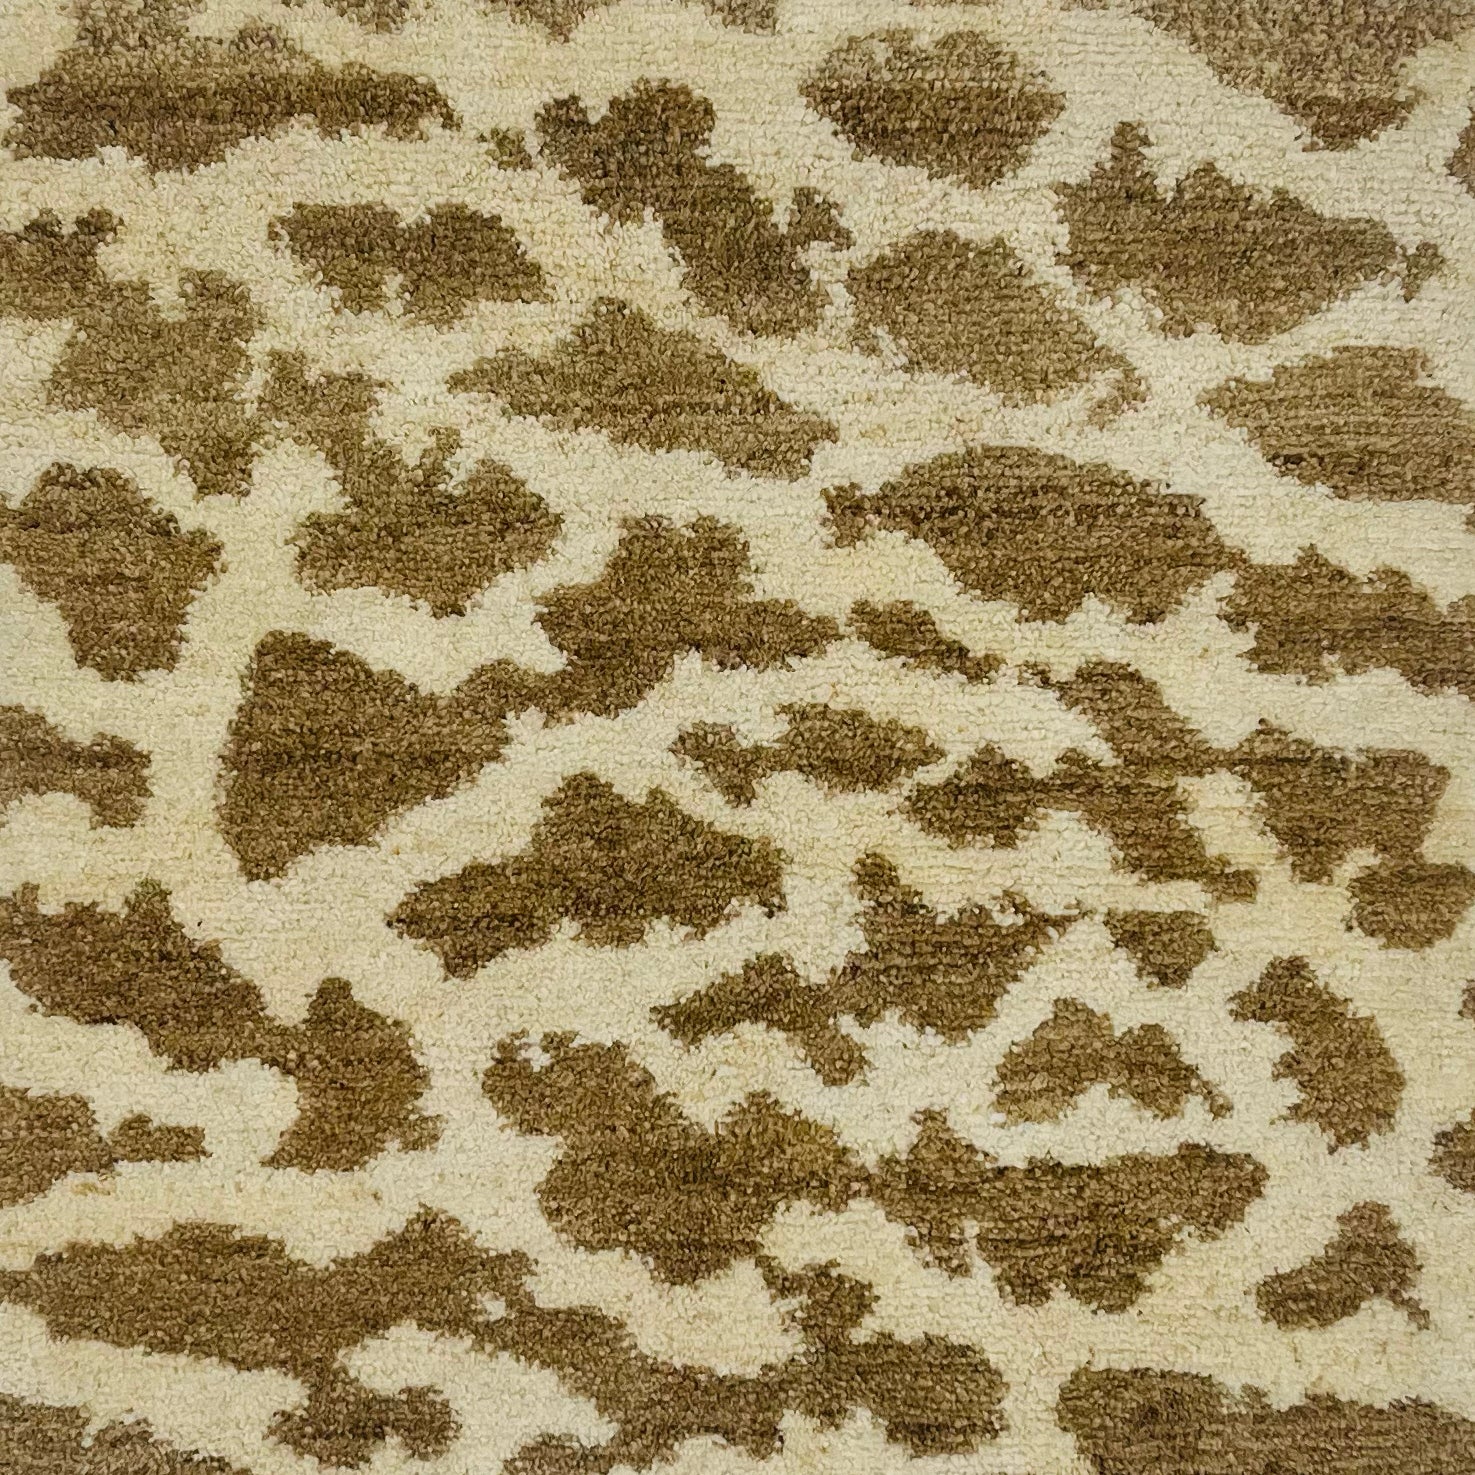 Handknotted rug swatch in natural fibers in giraffe pattern in white and taupe.